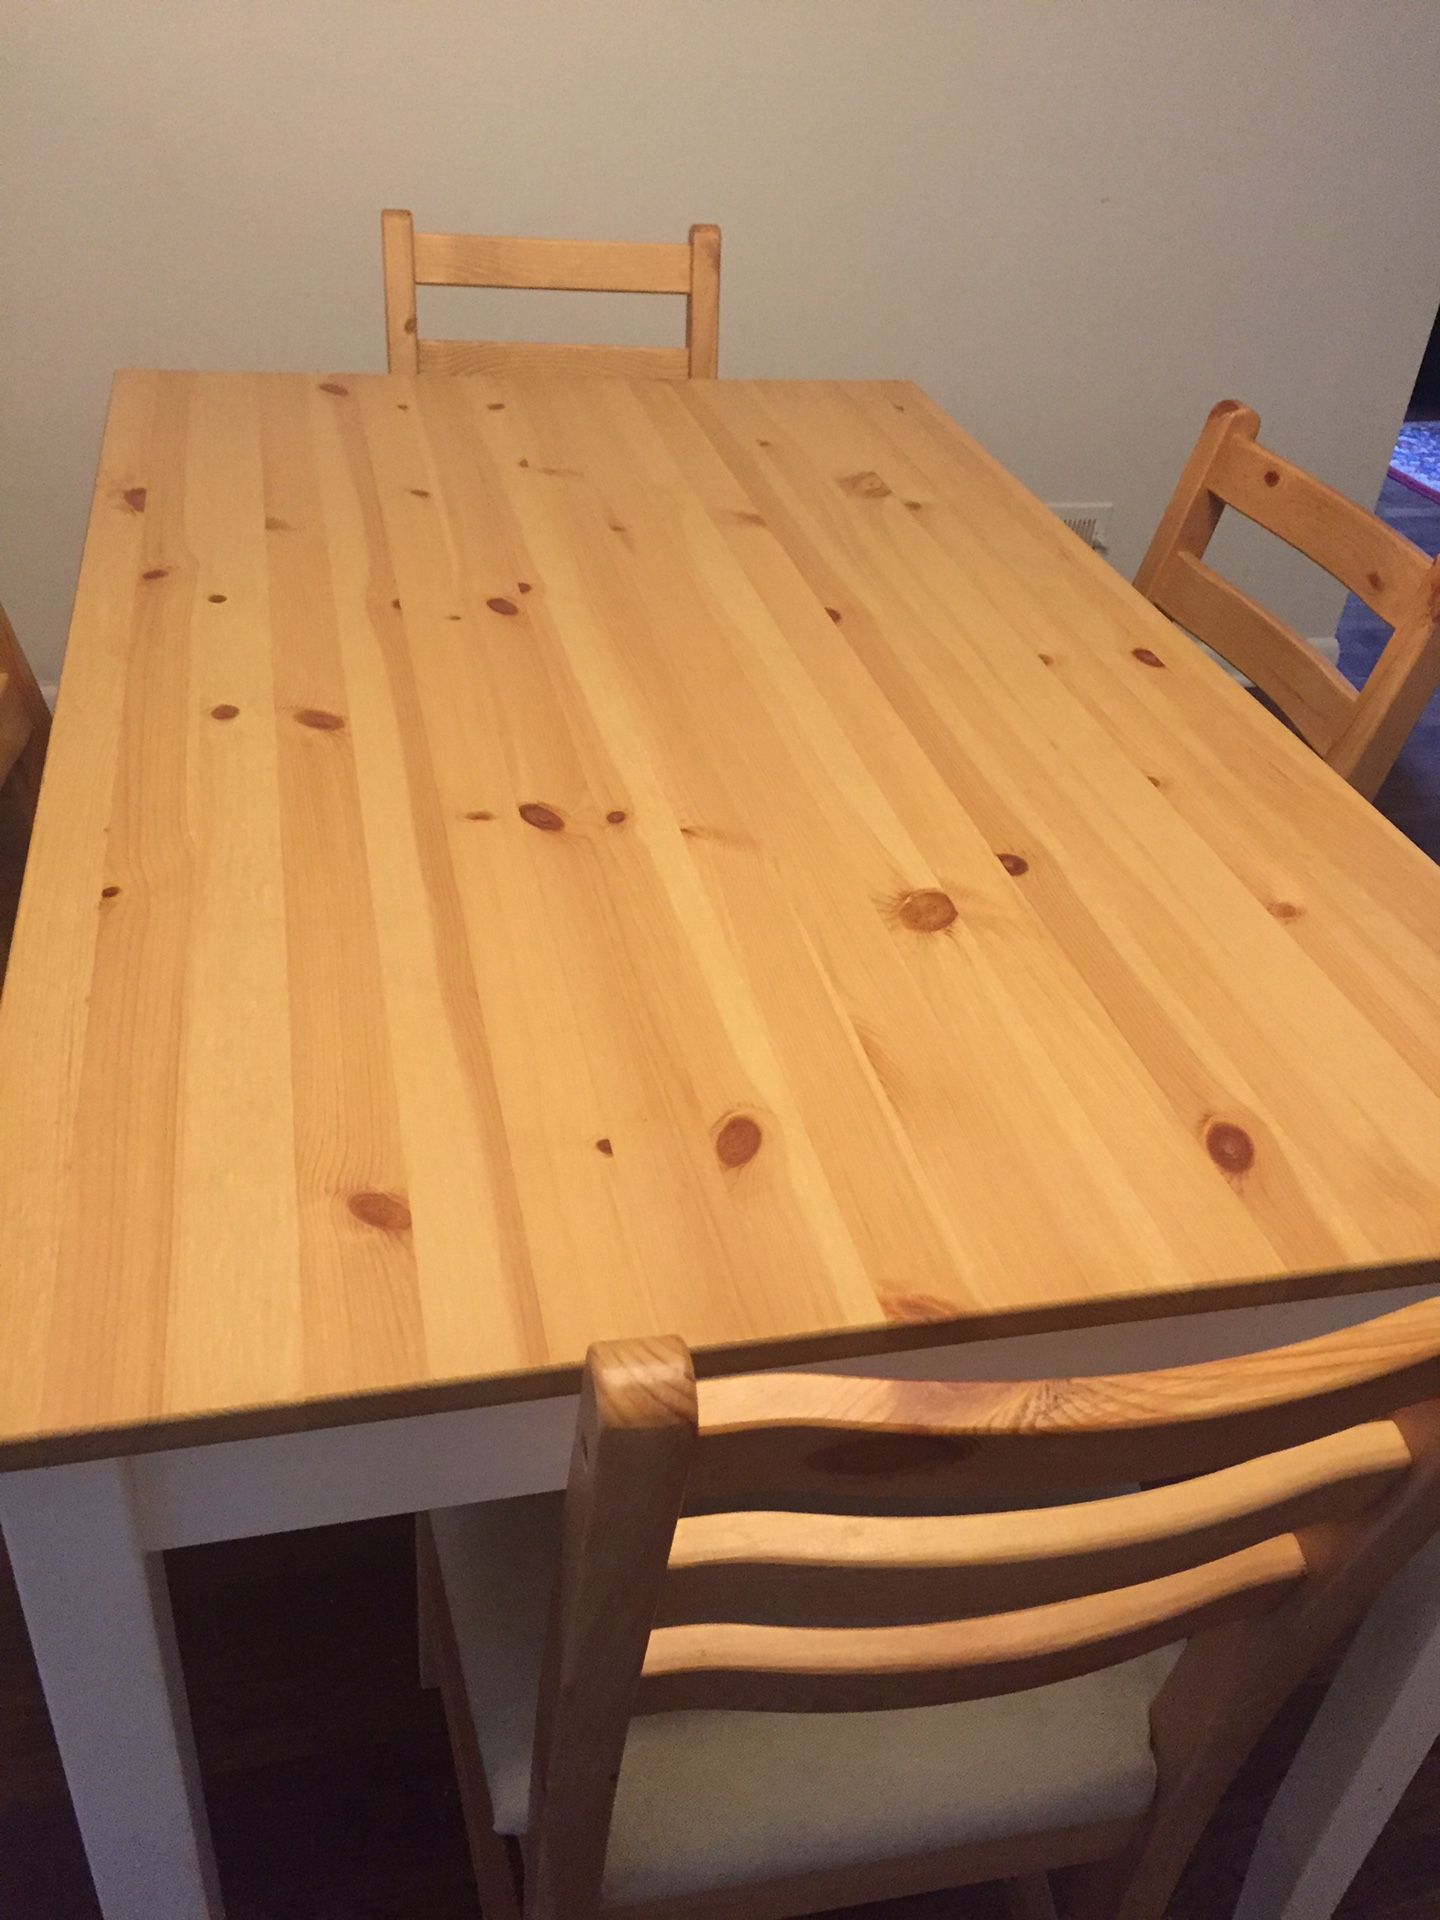 IKEA dining table with 4 chairs